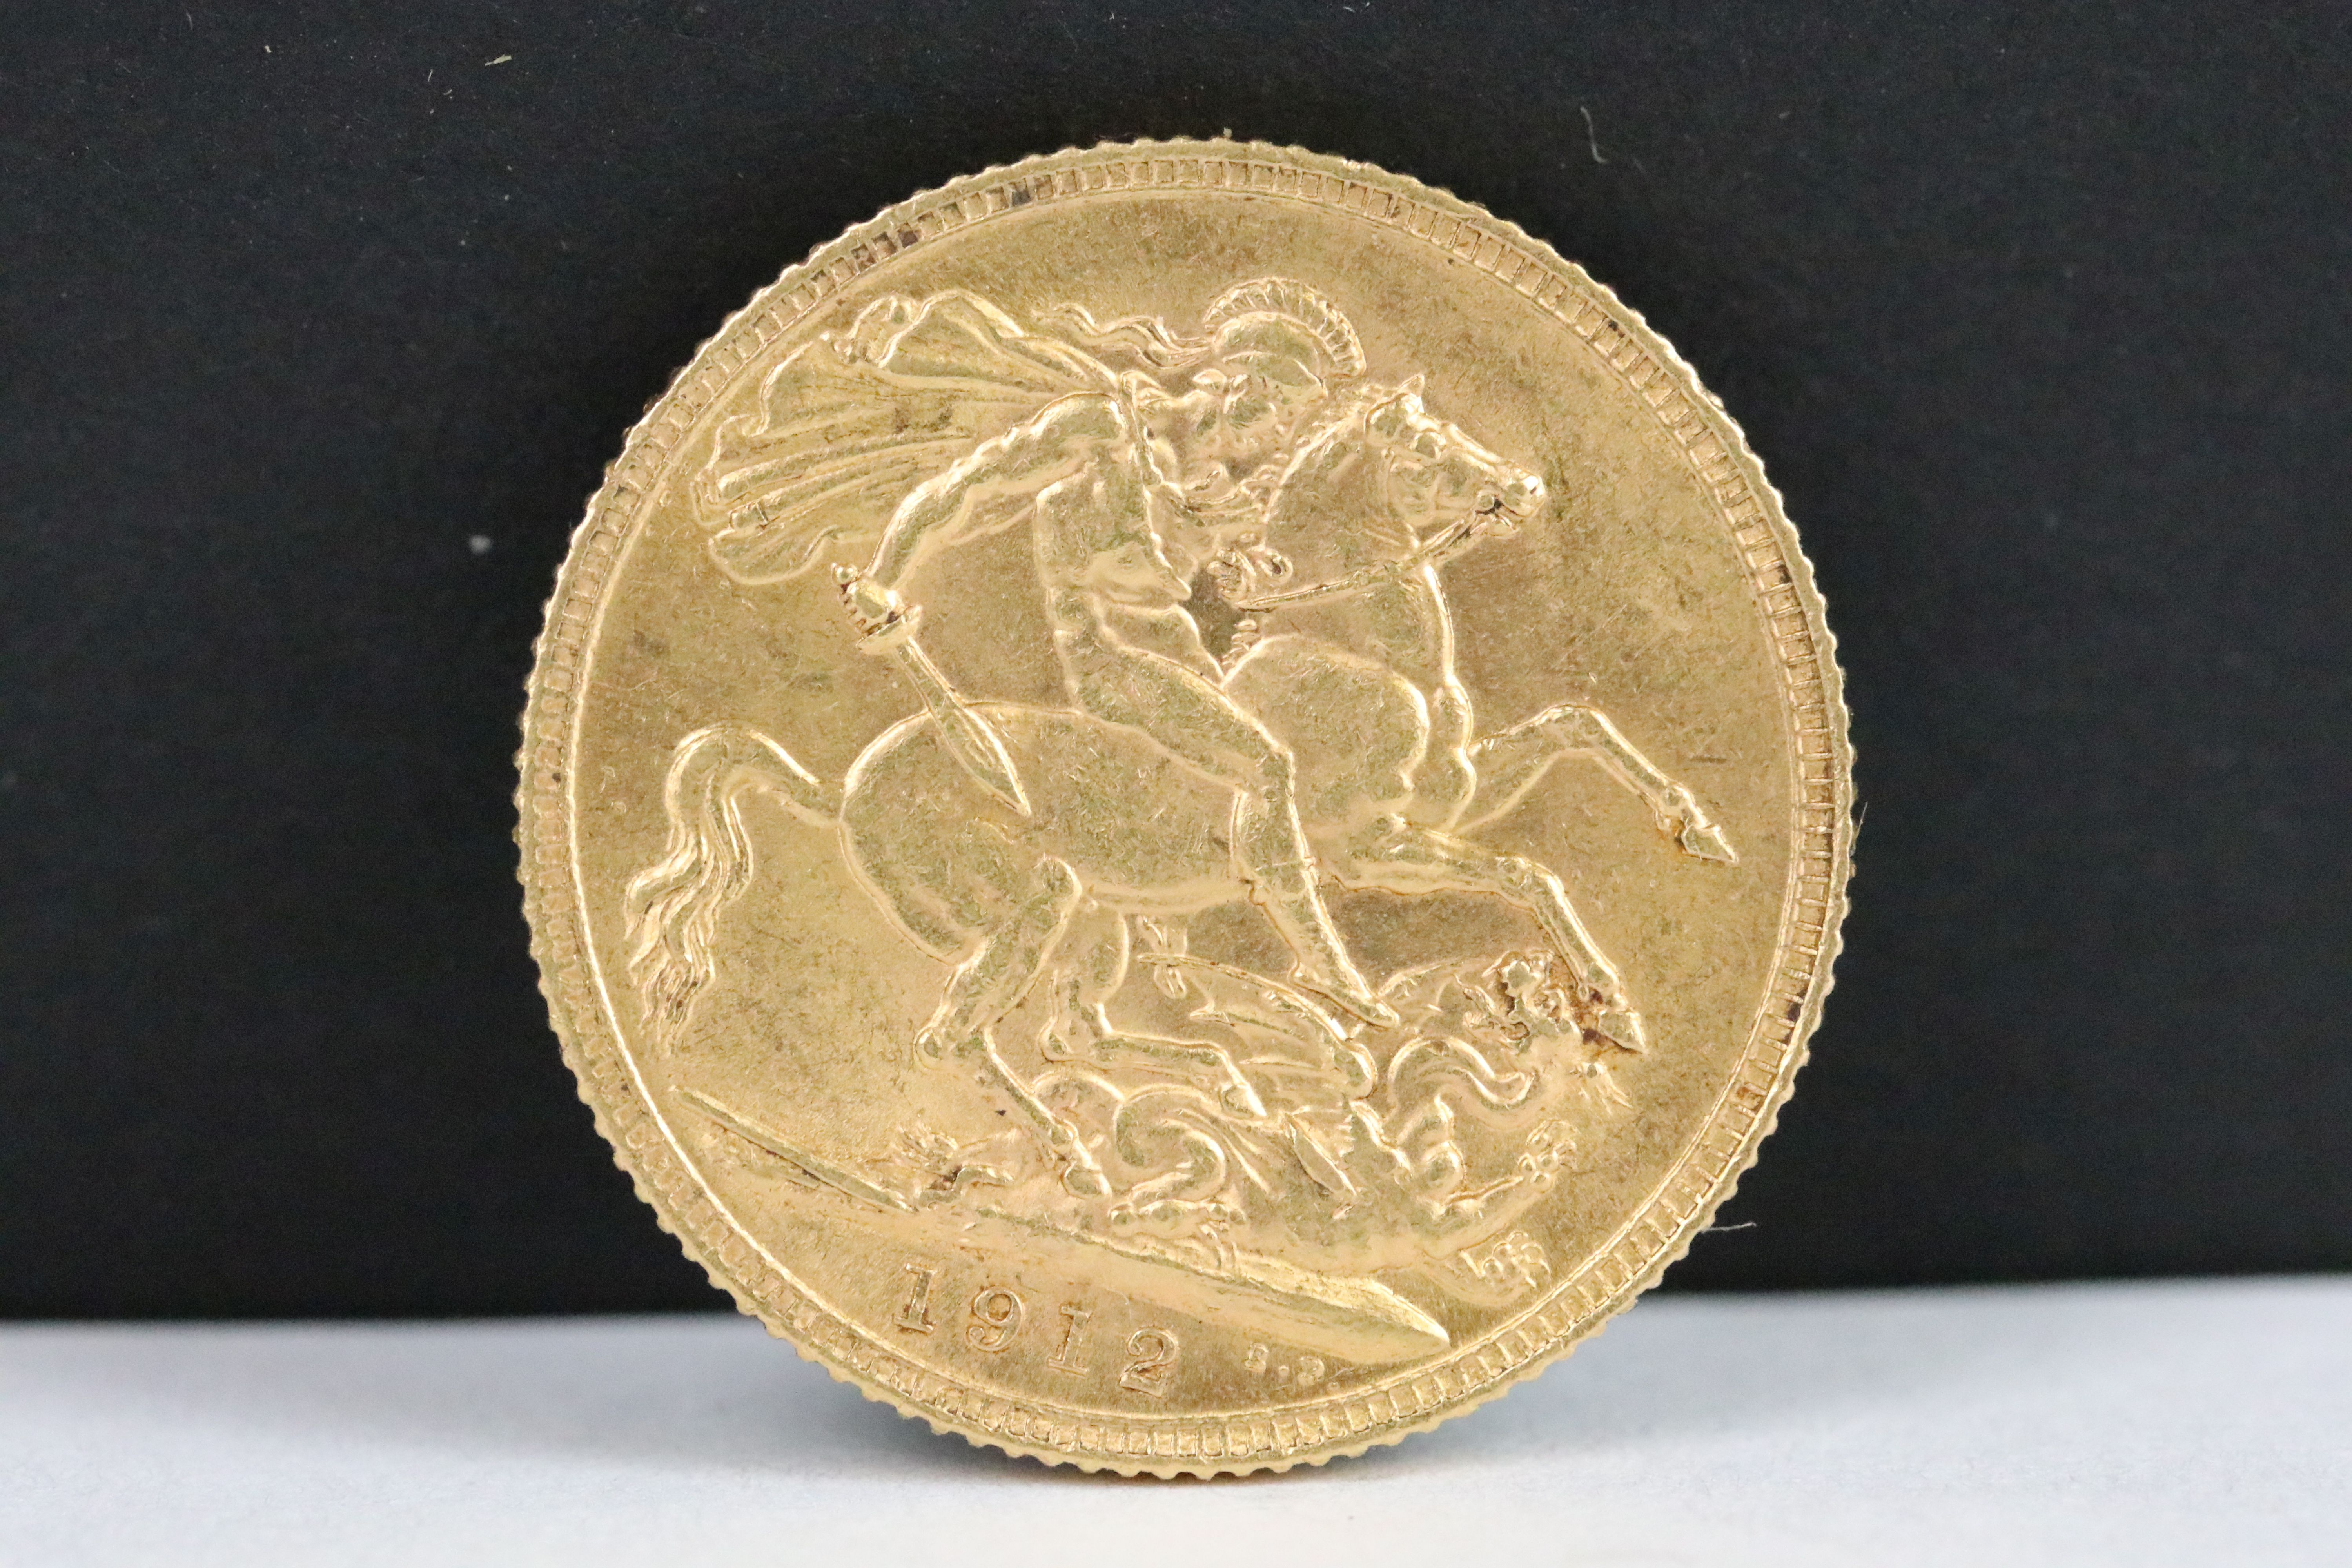 A British King George V 1912 full gold sovereign coin.